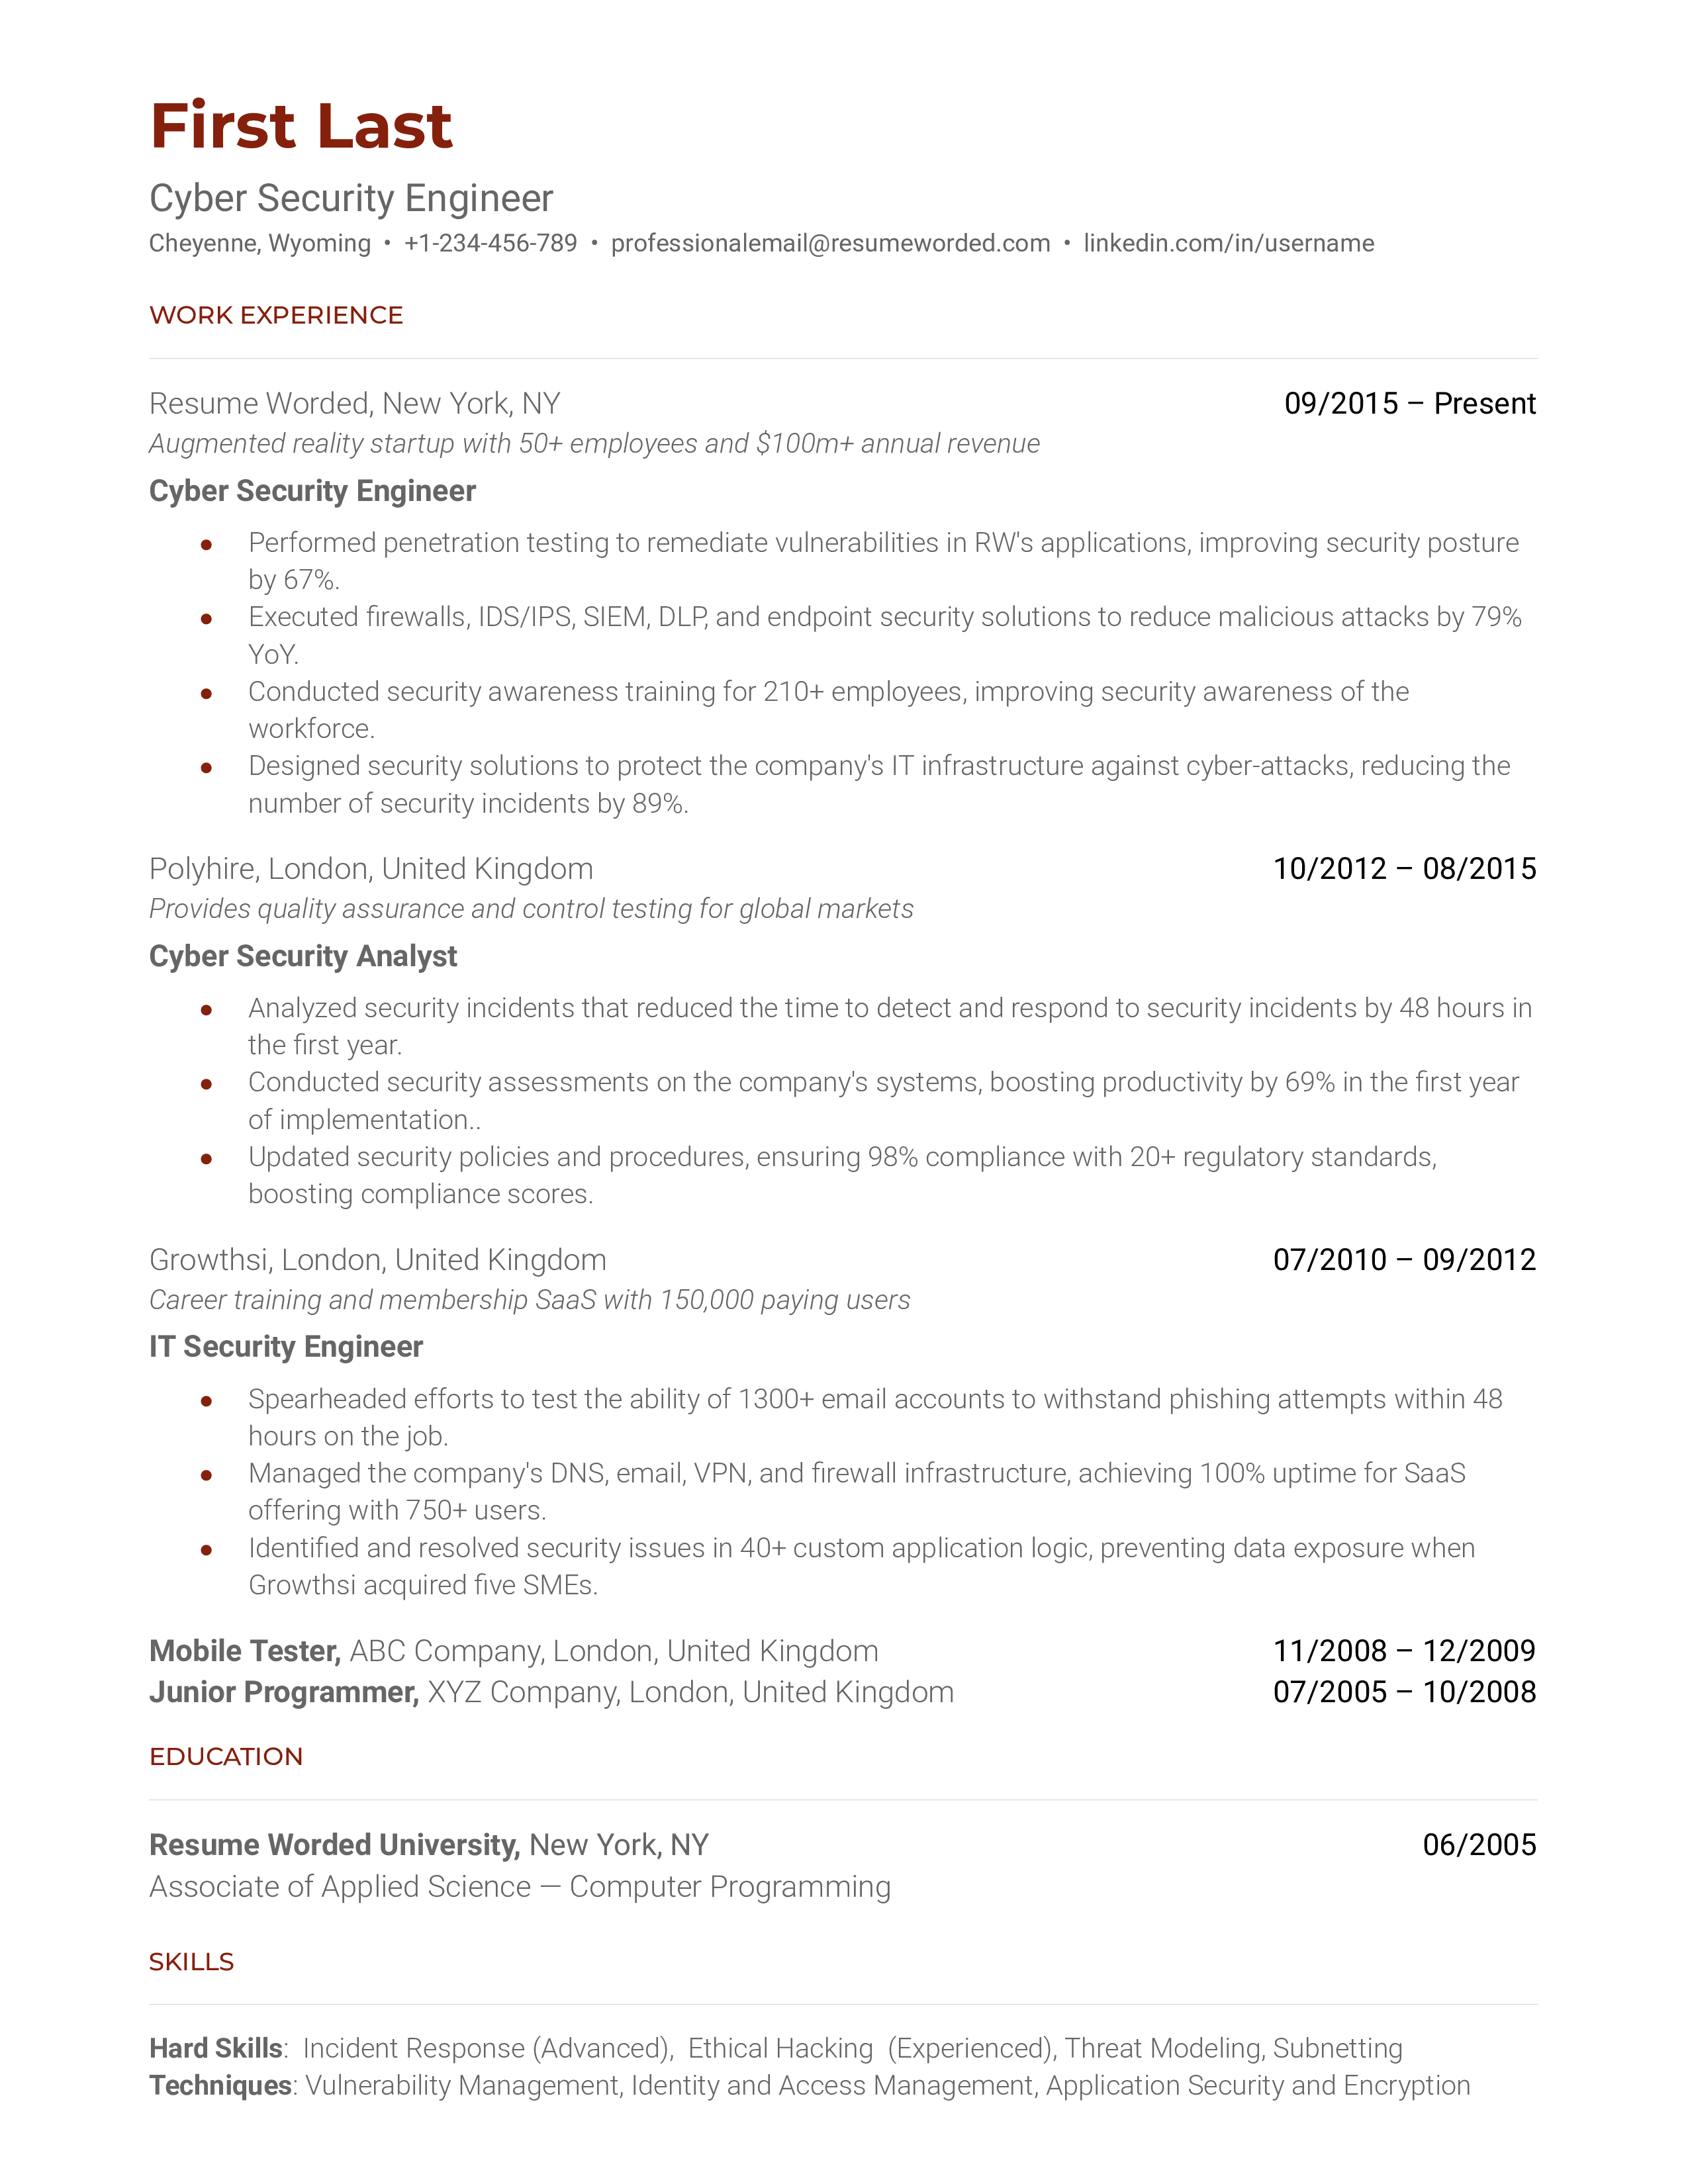 A well-structured CV for a prospective Cyber Security Engineer demonstrating hands-on experience and current security knowledge.